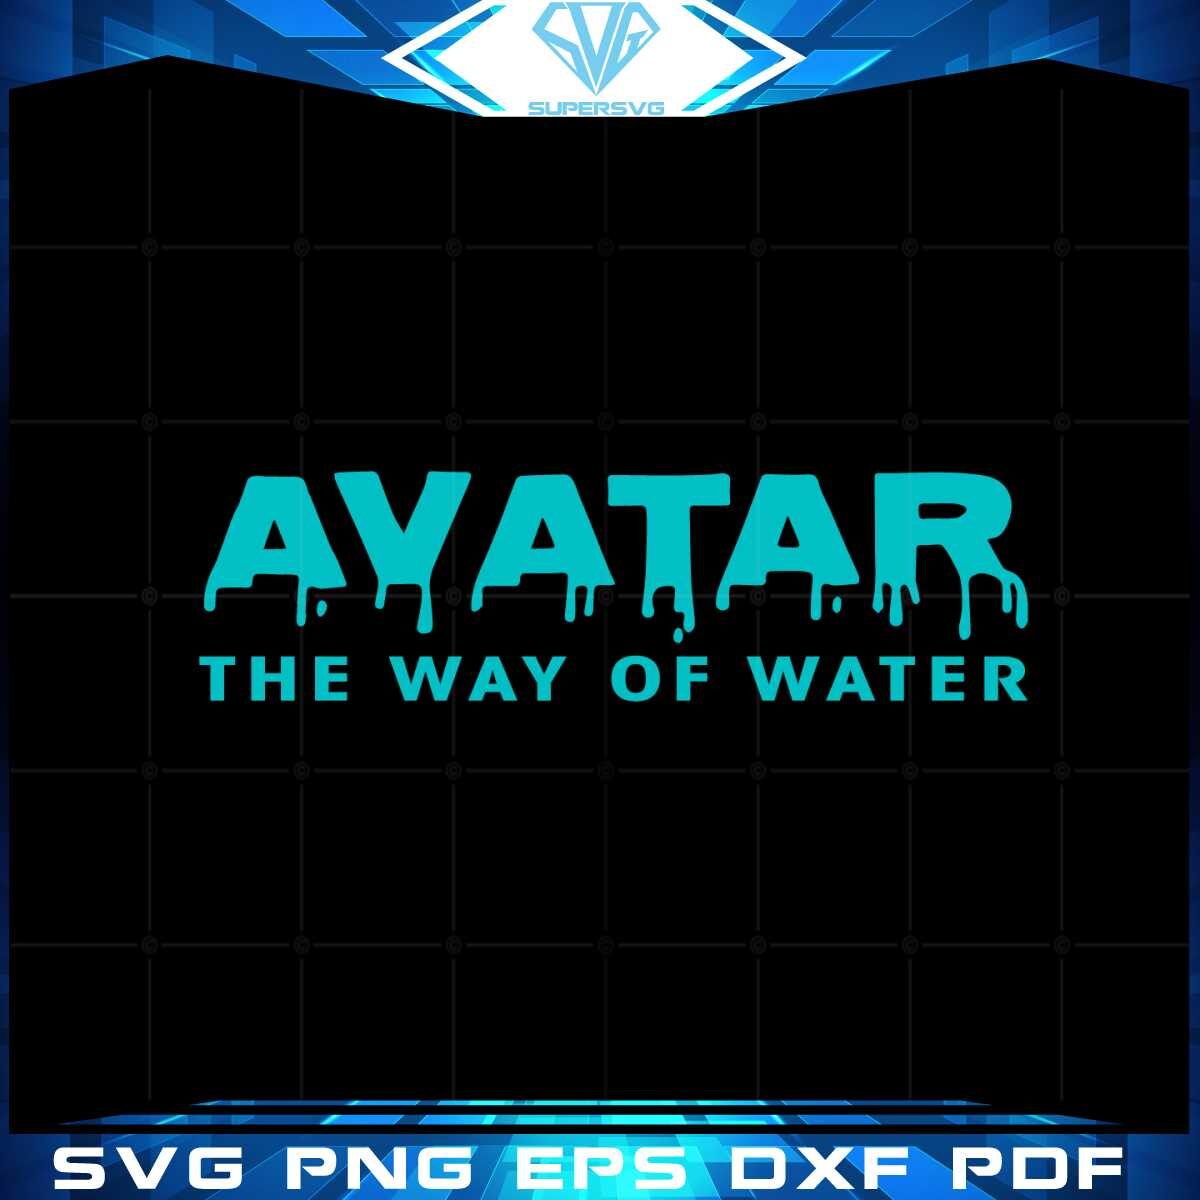 avatar-the-way-of-water-avatar-2-movie-svg-graphic-designs-files